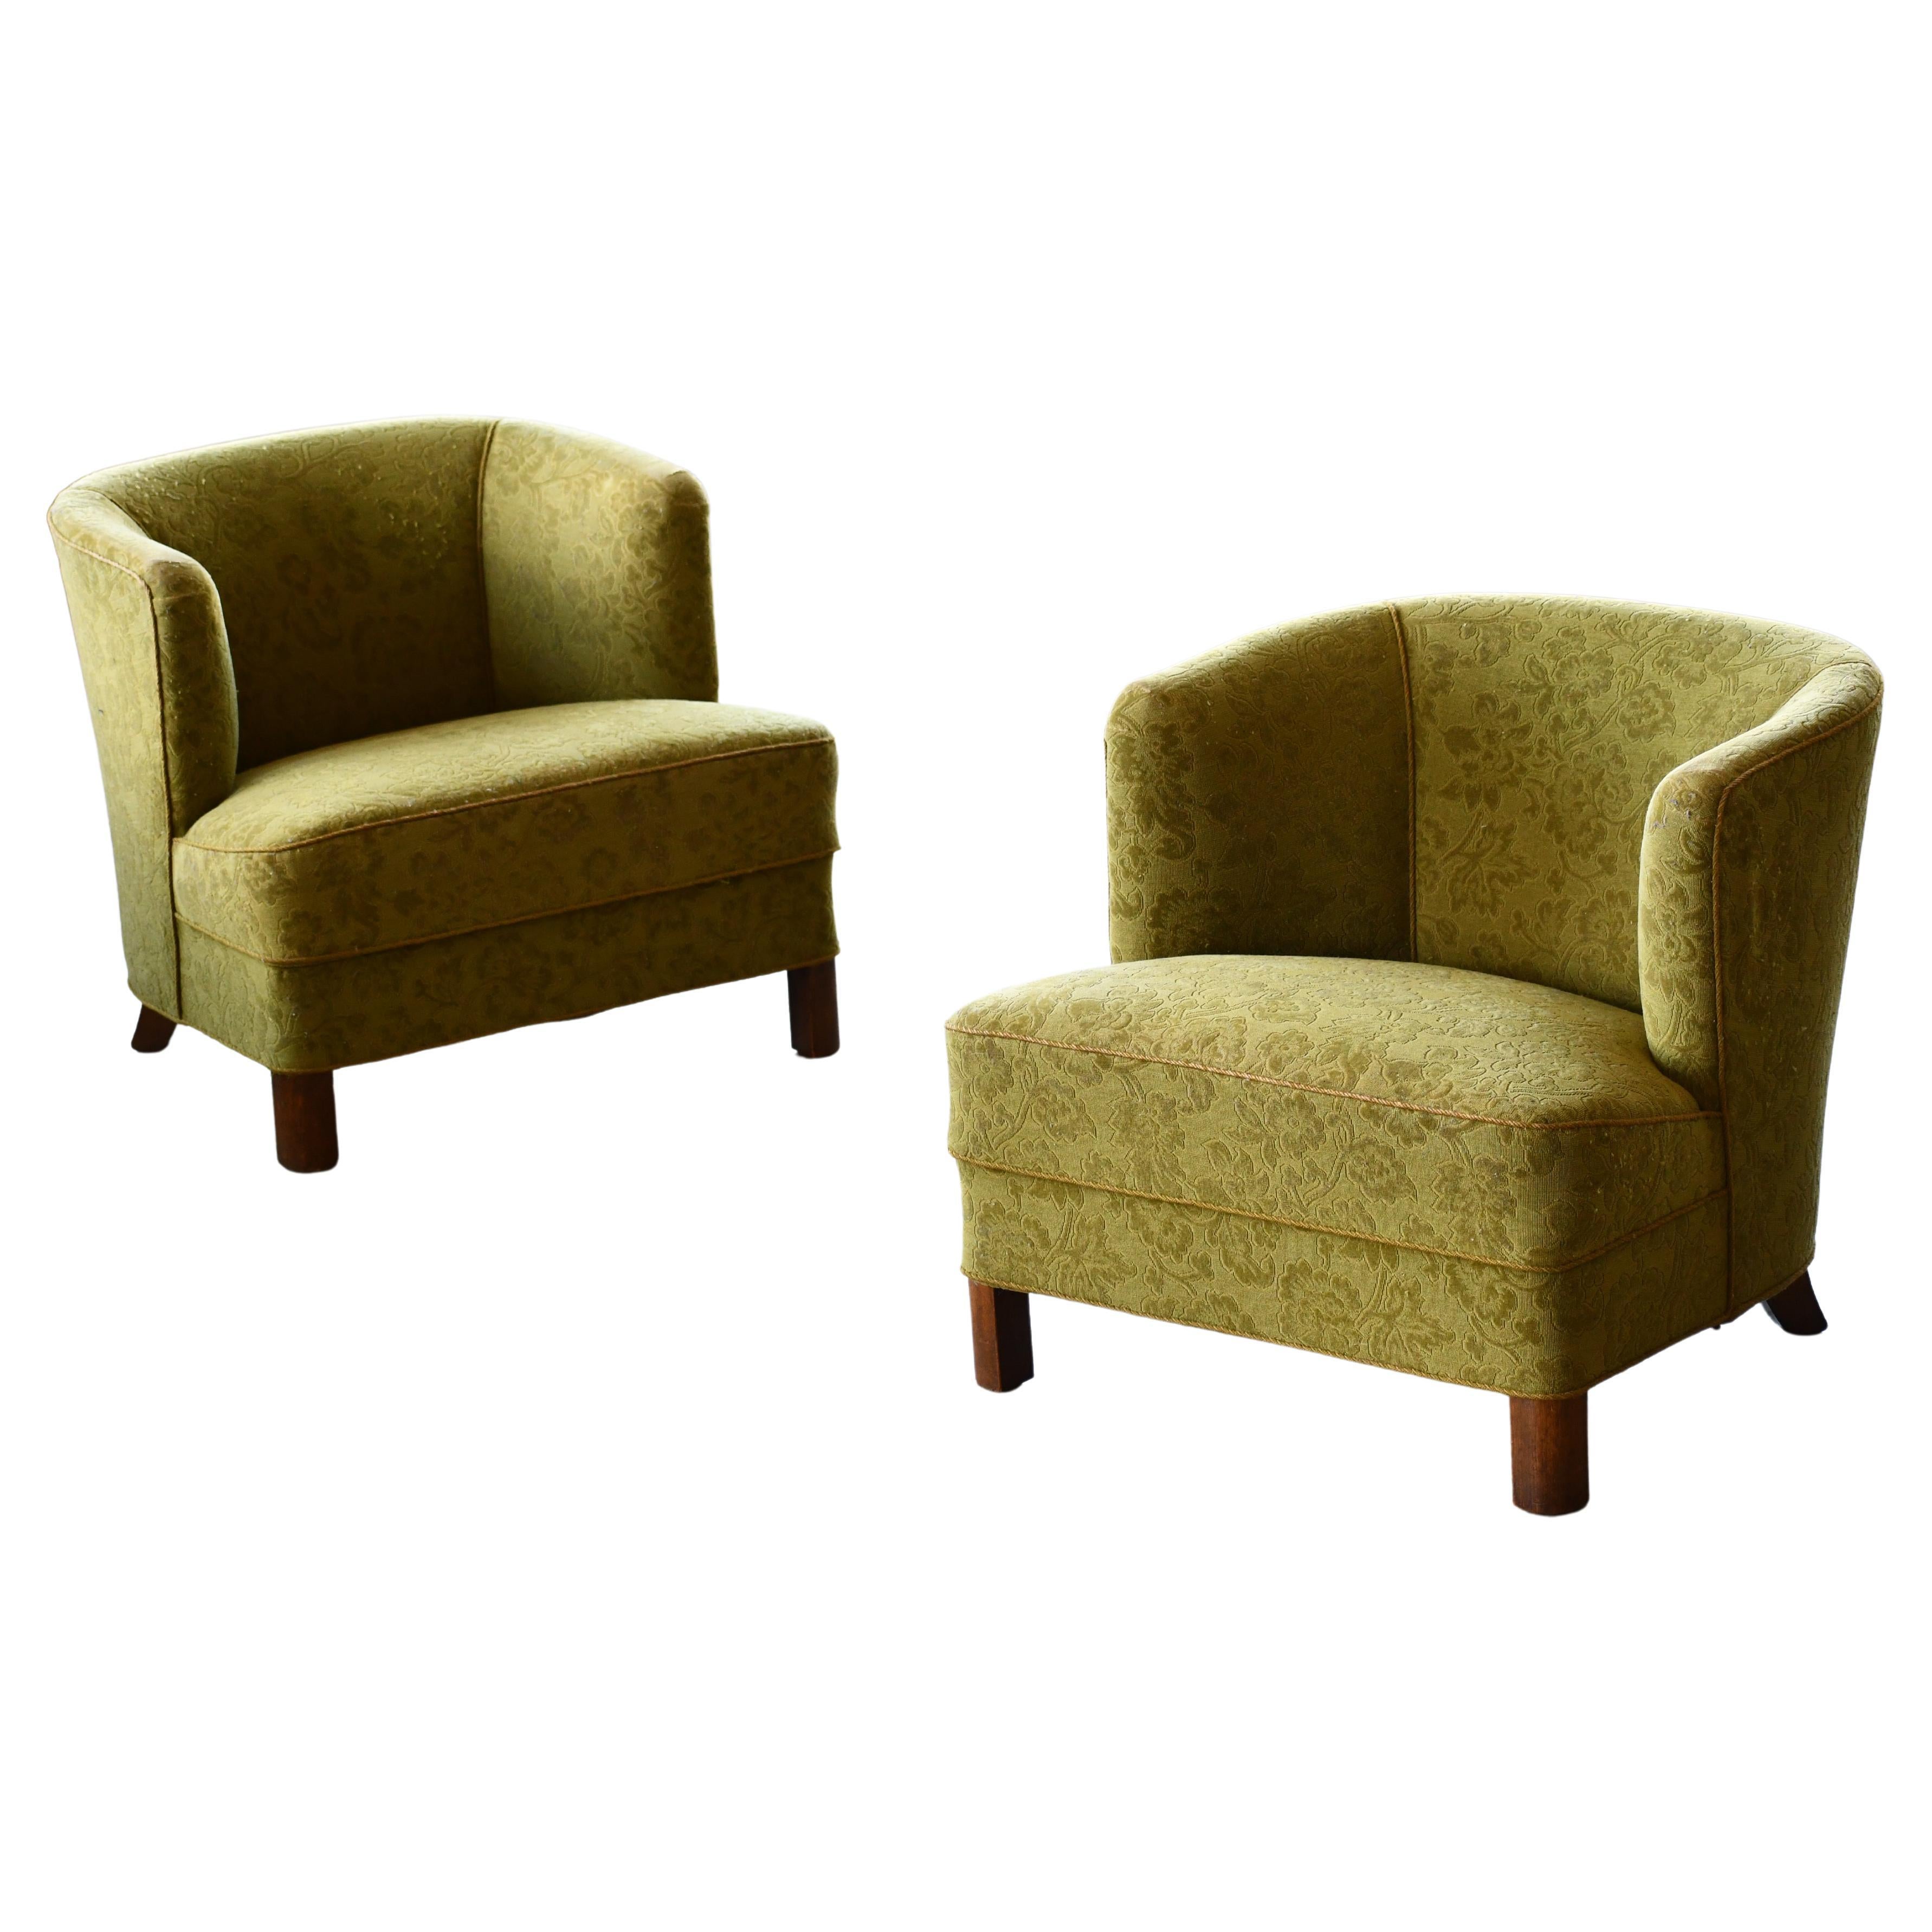 Pair of Ultracool Late Art Deco or Early Midcentury Danish Lounge Chairs 1940's